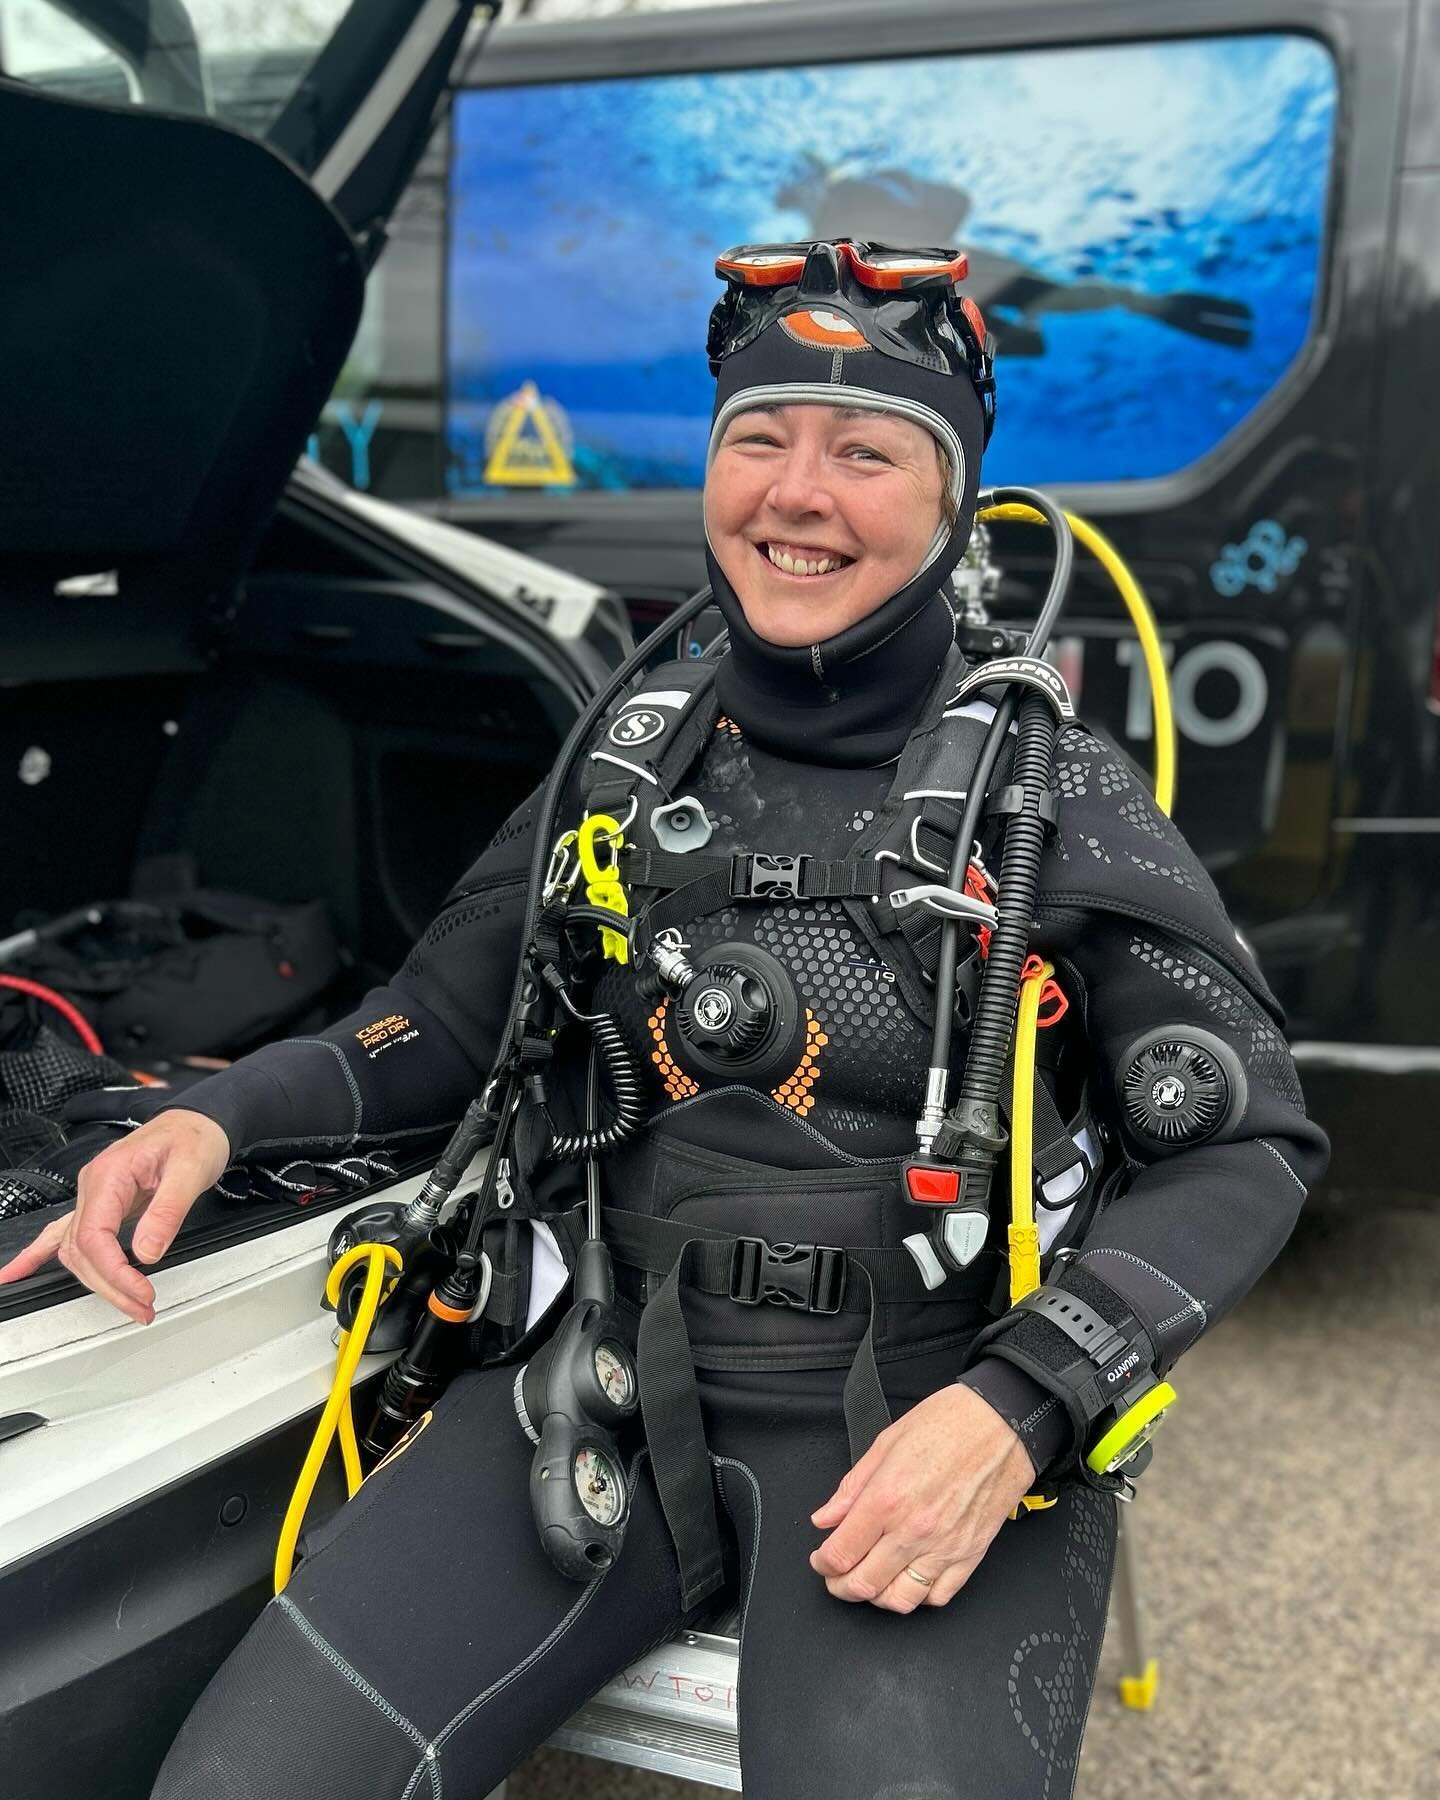 Today&rsquo;s fun down at Stoney Cove!

We had new member Josh testing out his new drysuit and a few of our members getting some time in underwater ahead of our club Swanage trip next weekend 🤿

#Leicesterunderwaterexplorationclub #luec #bsacdivers 